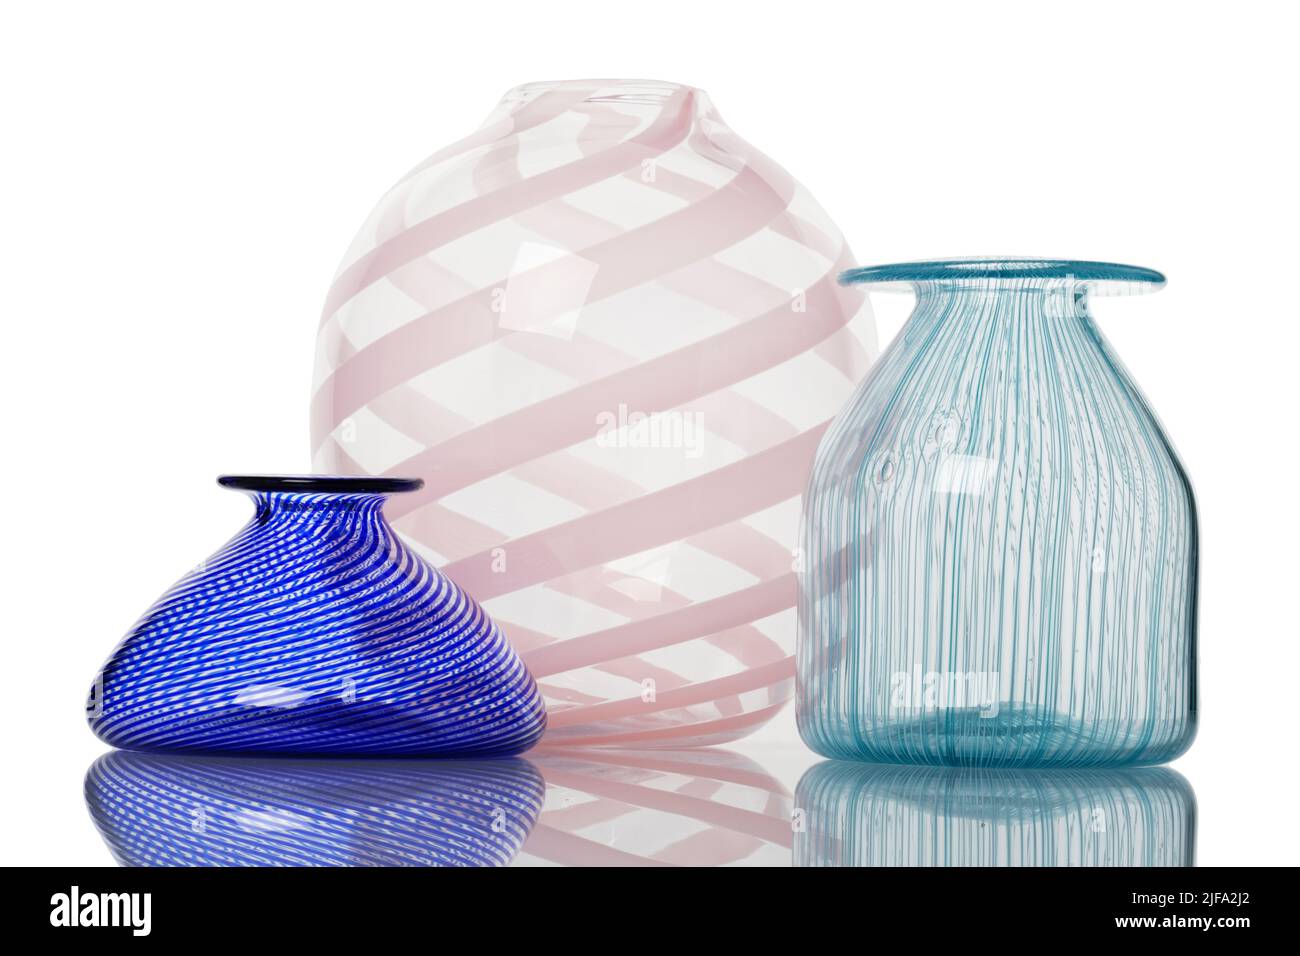 Glassware vase. A group of three small vases against a white background. Stock Photo